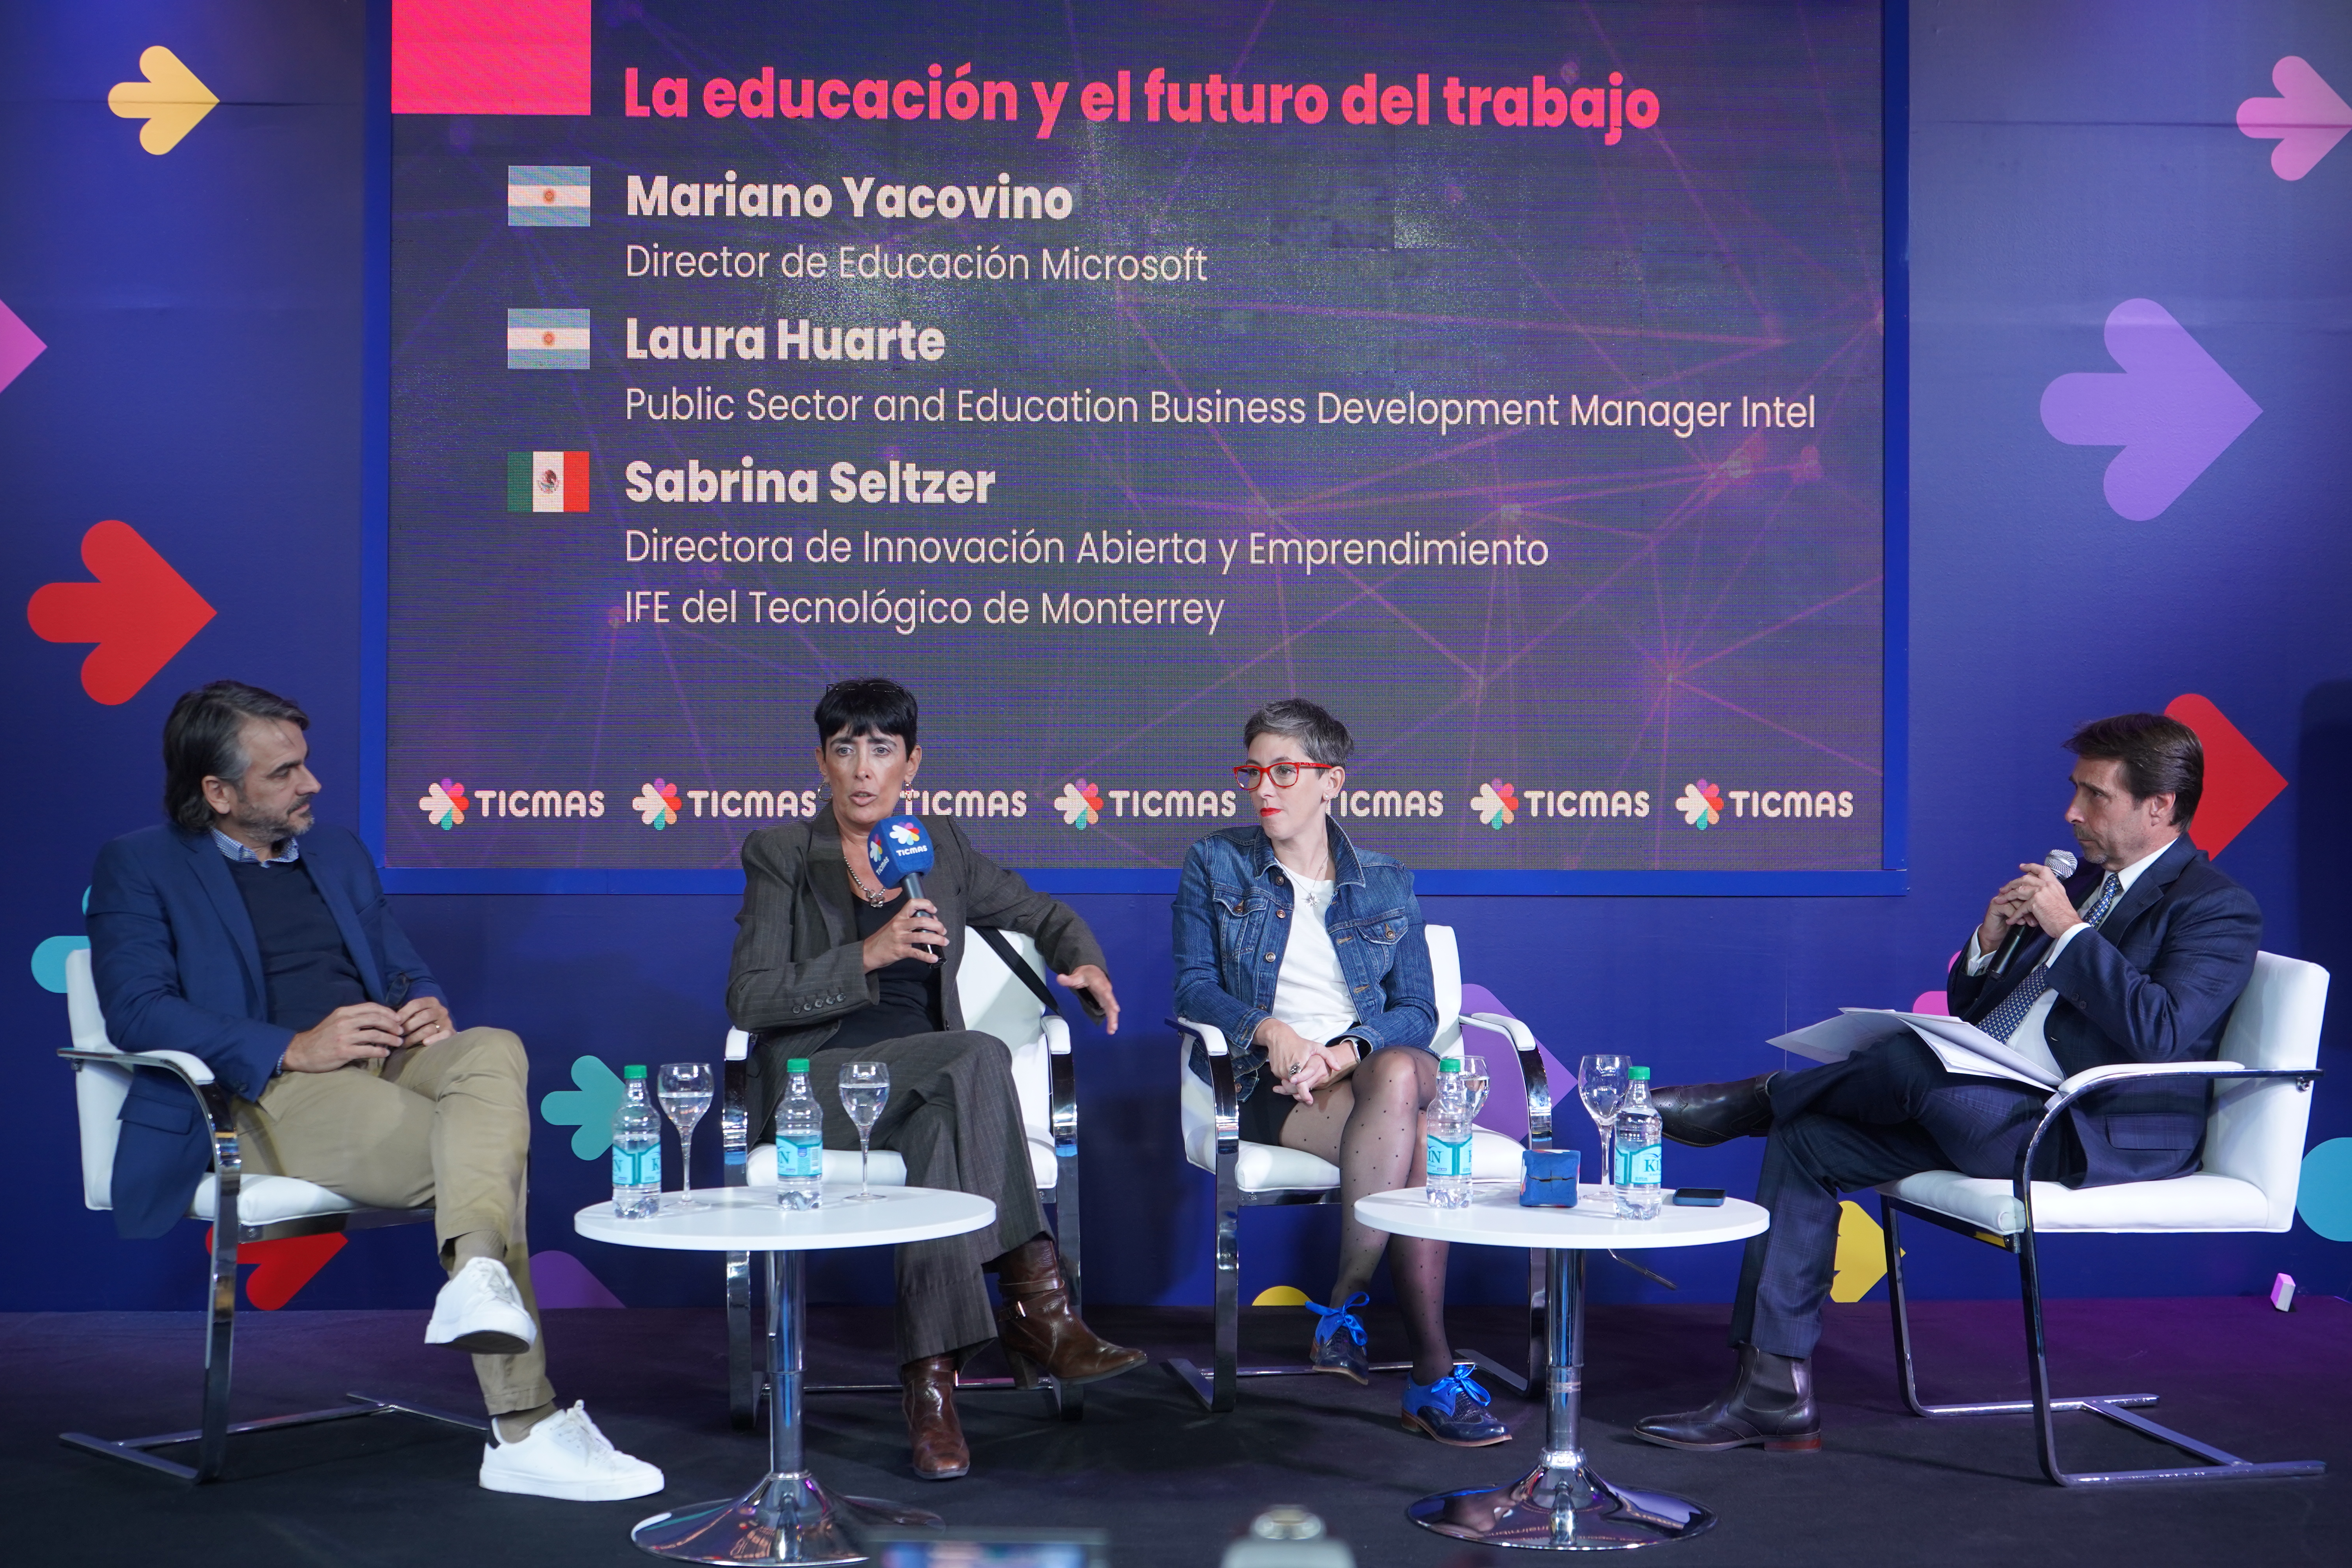 Artificial intelligence, the future of work and changes in education: topics addressed by Mariano Yacovino, Laura Huarte and Sabrina Seltzer speak in a panel moderated by Eduardo Feinmann (Photo: Agustín Brashich)